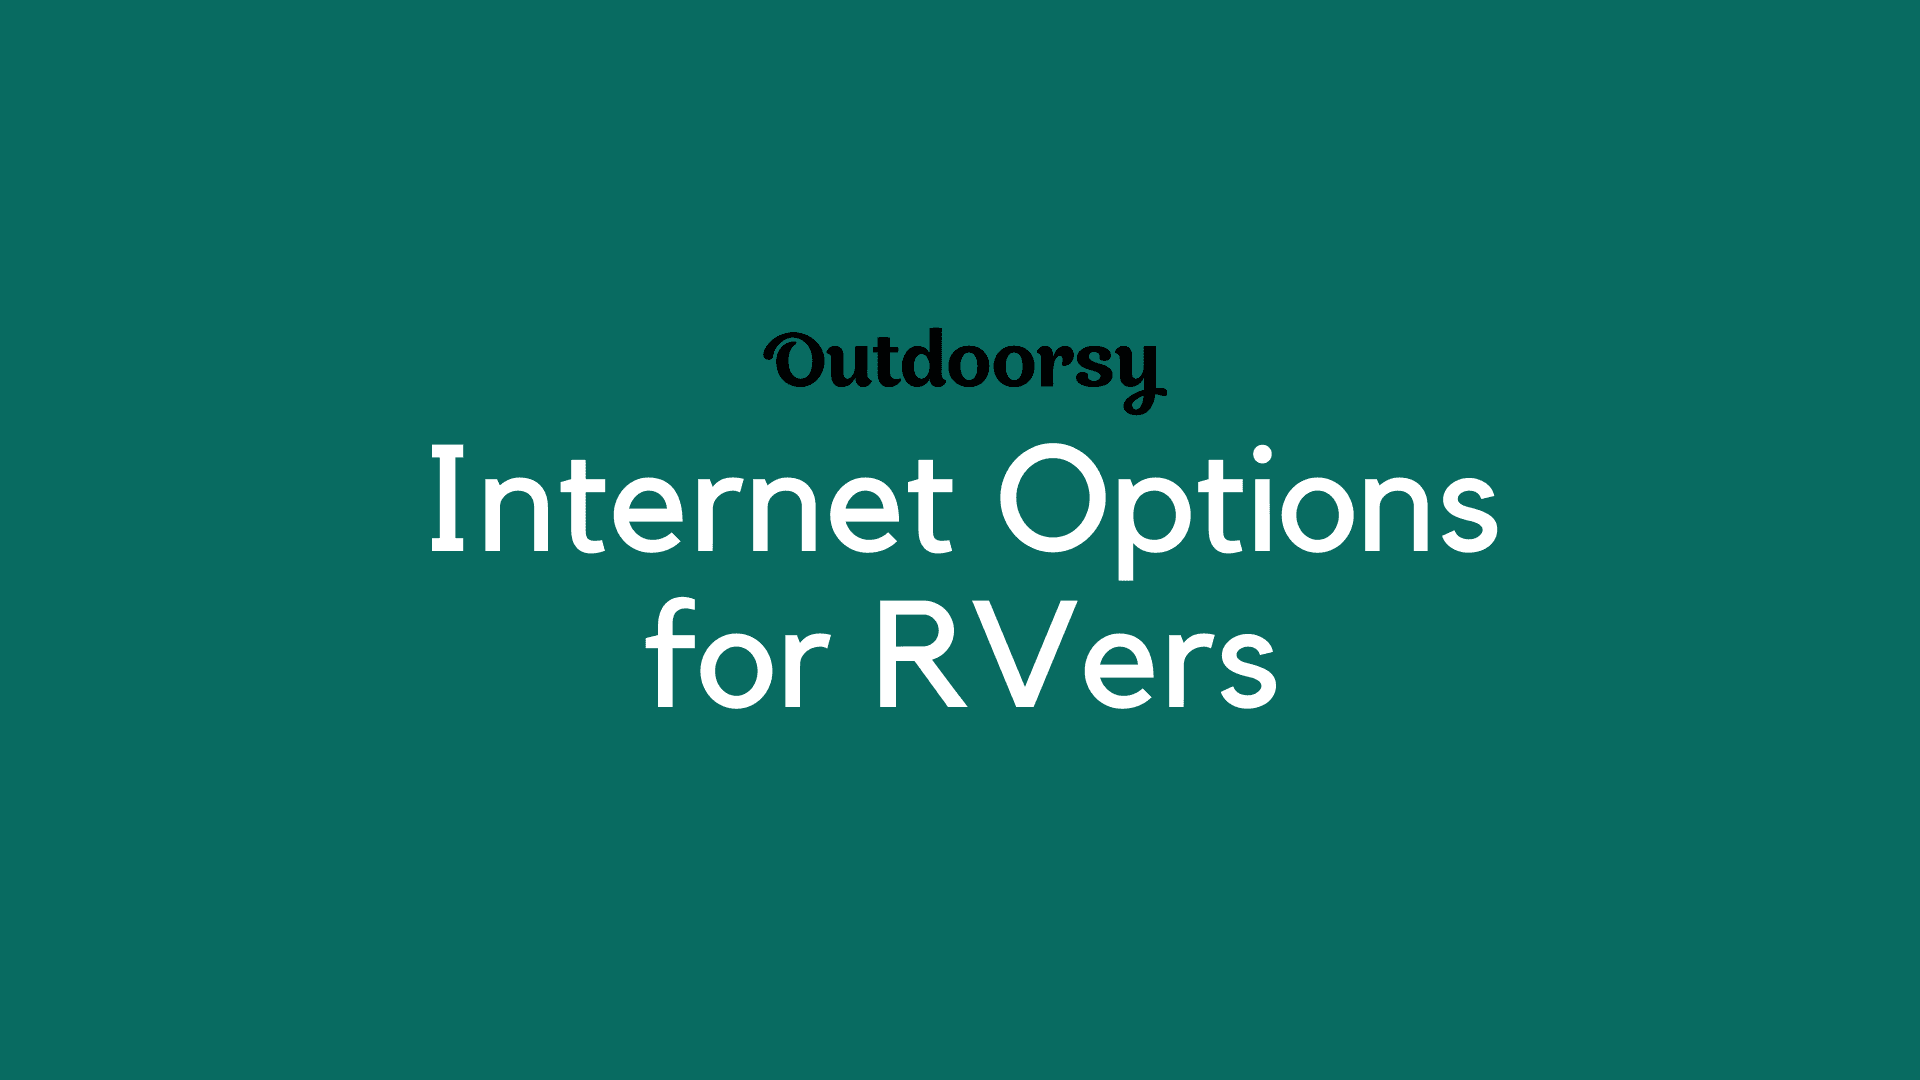 Internet Options for RVers